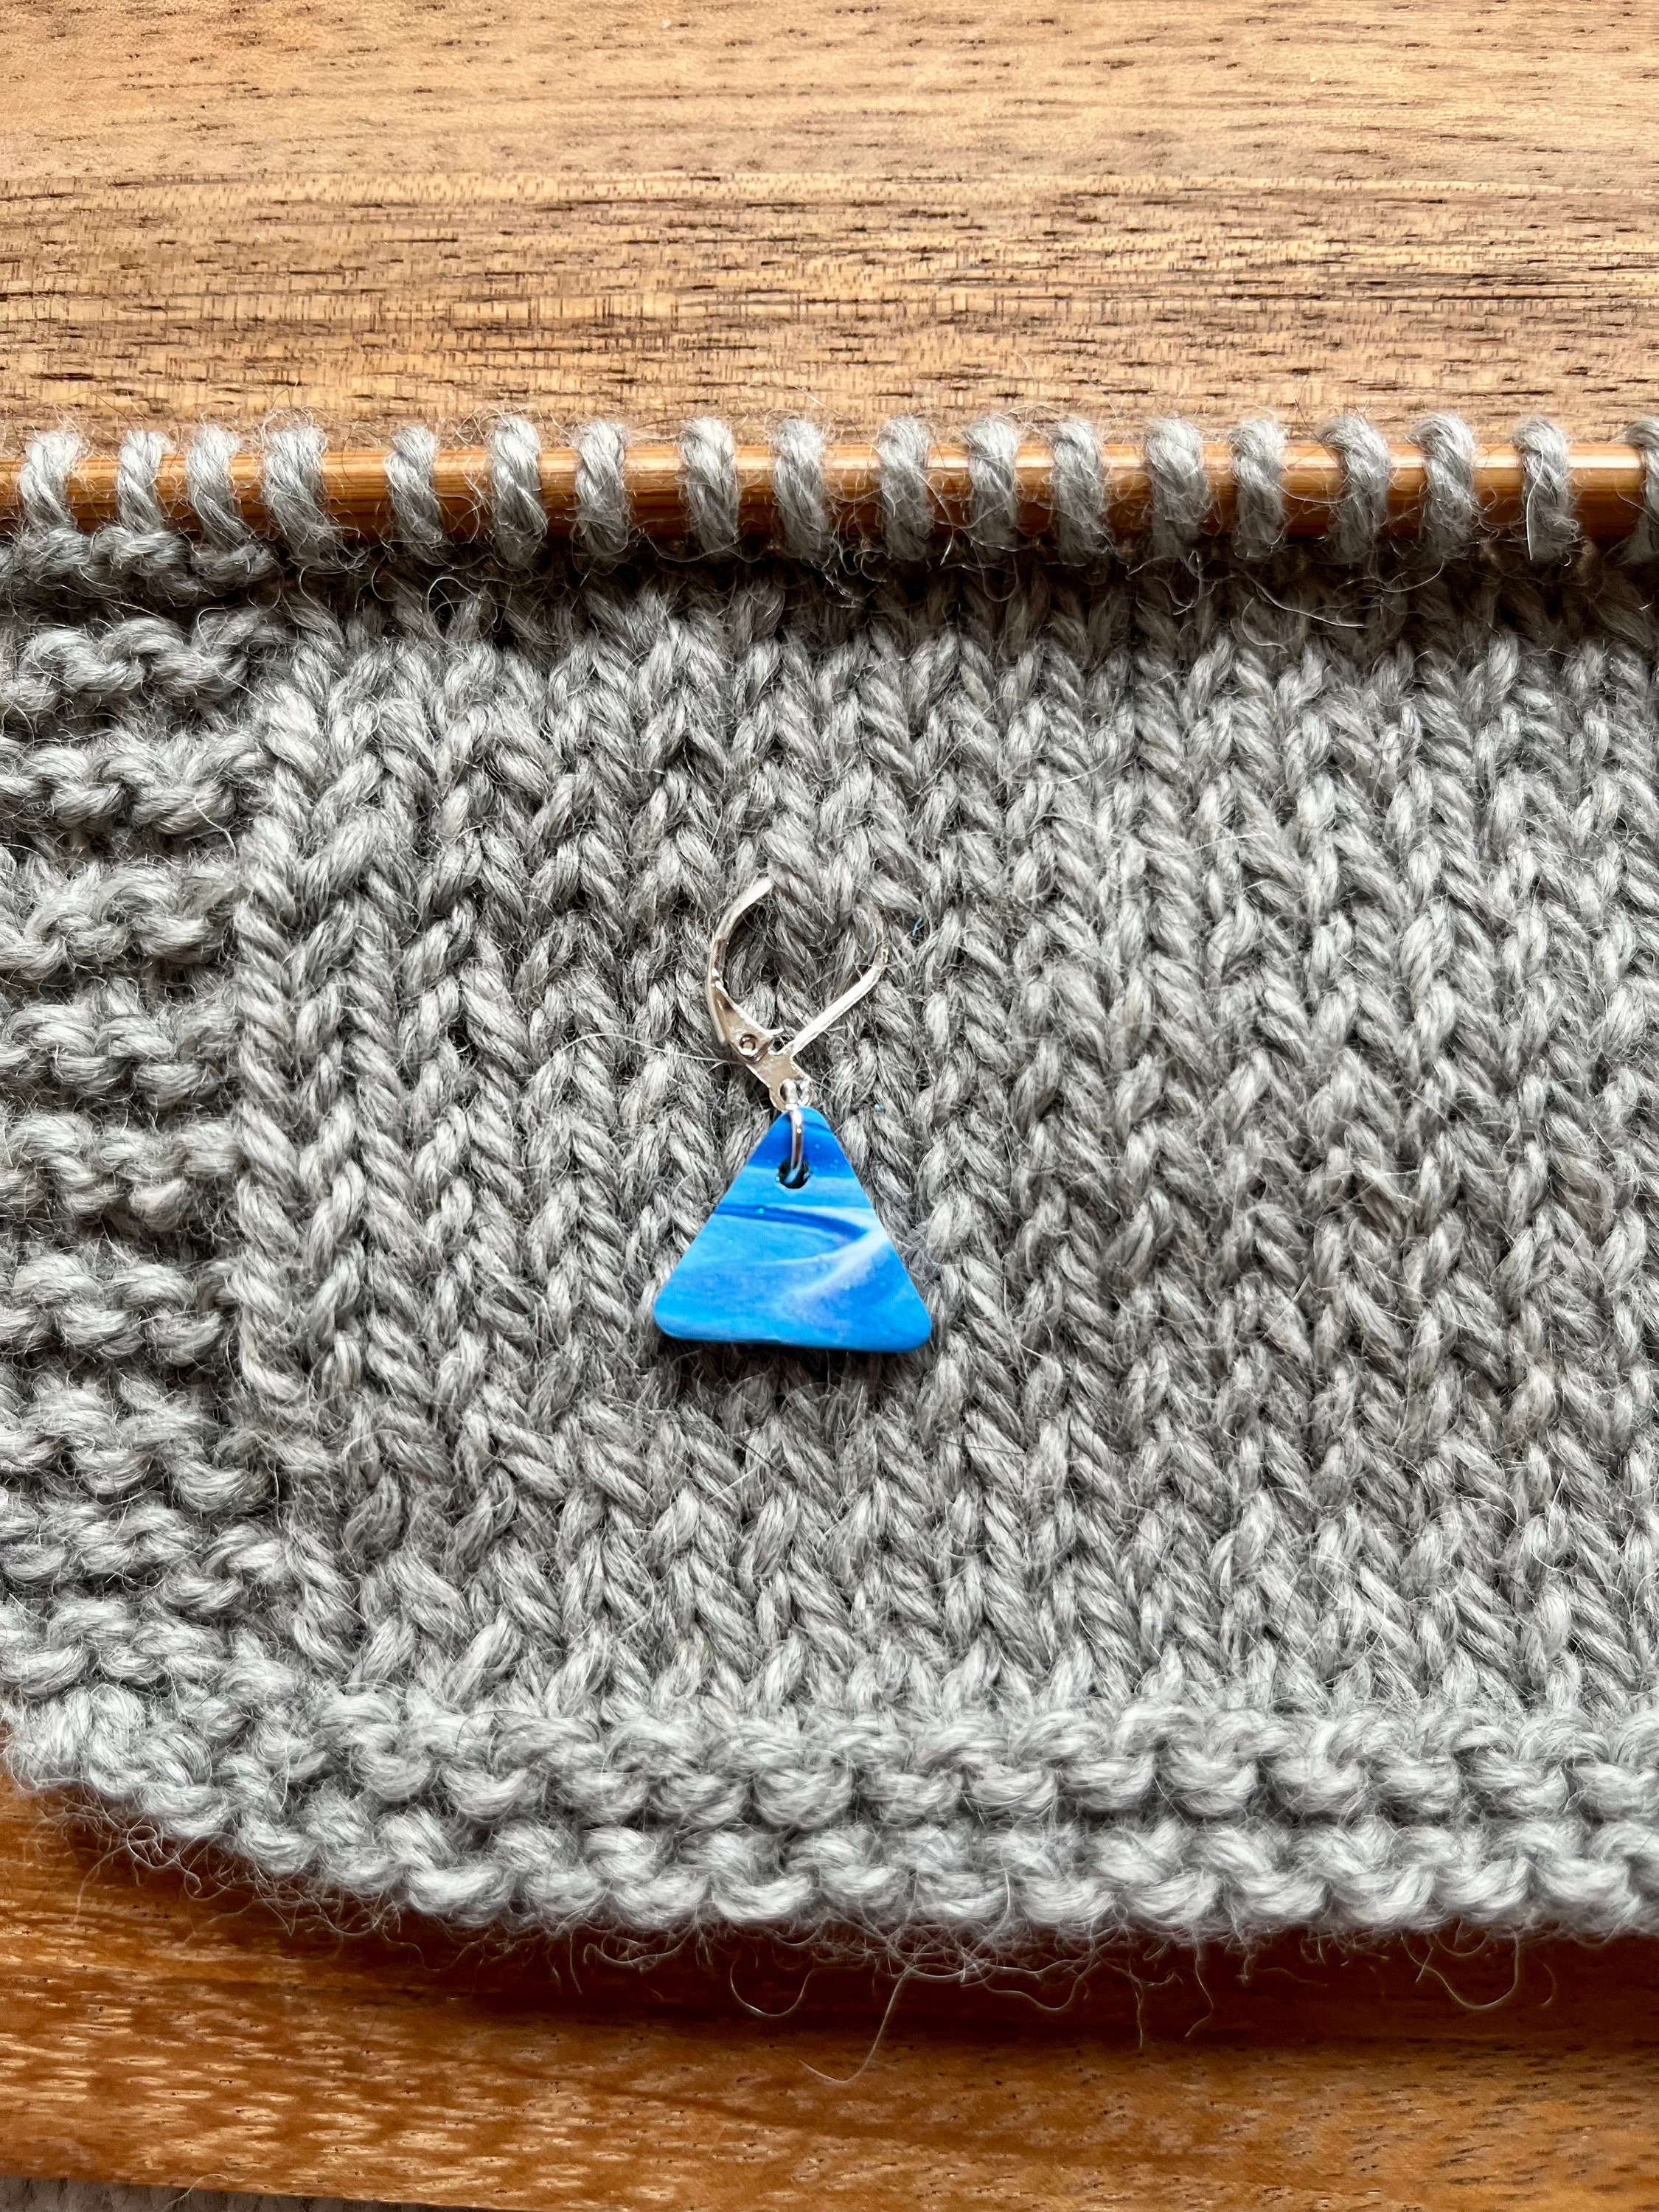 Polymer Clay Stitch Markers for Knitting and Crochet. Progress